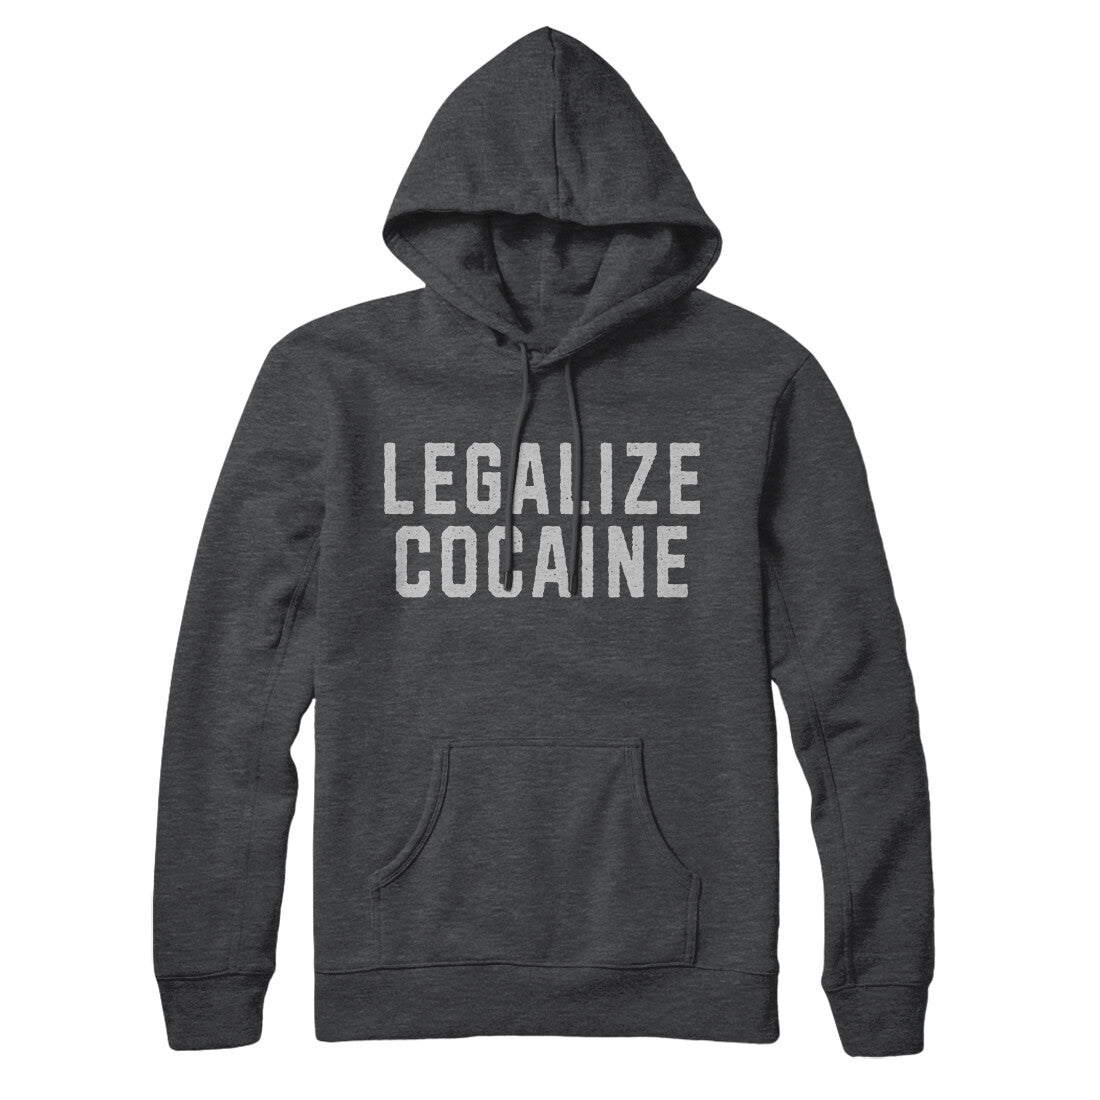 Legalize Cocaine in Charcoal Heather Color